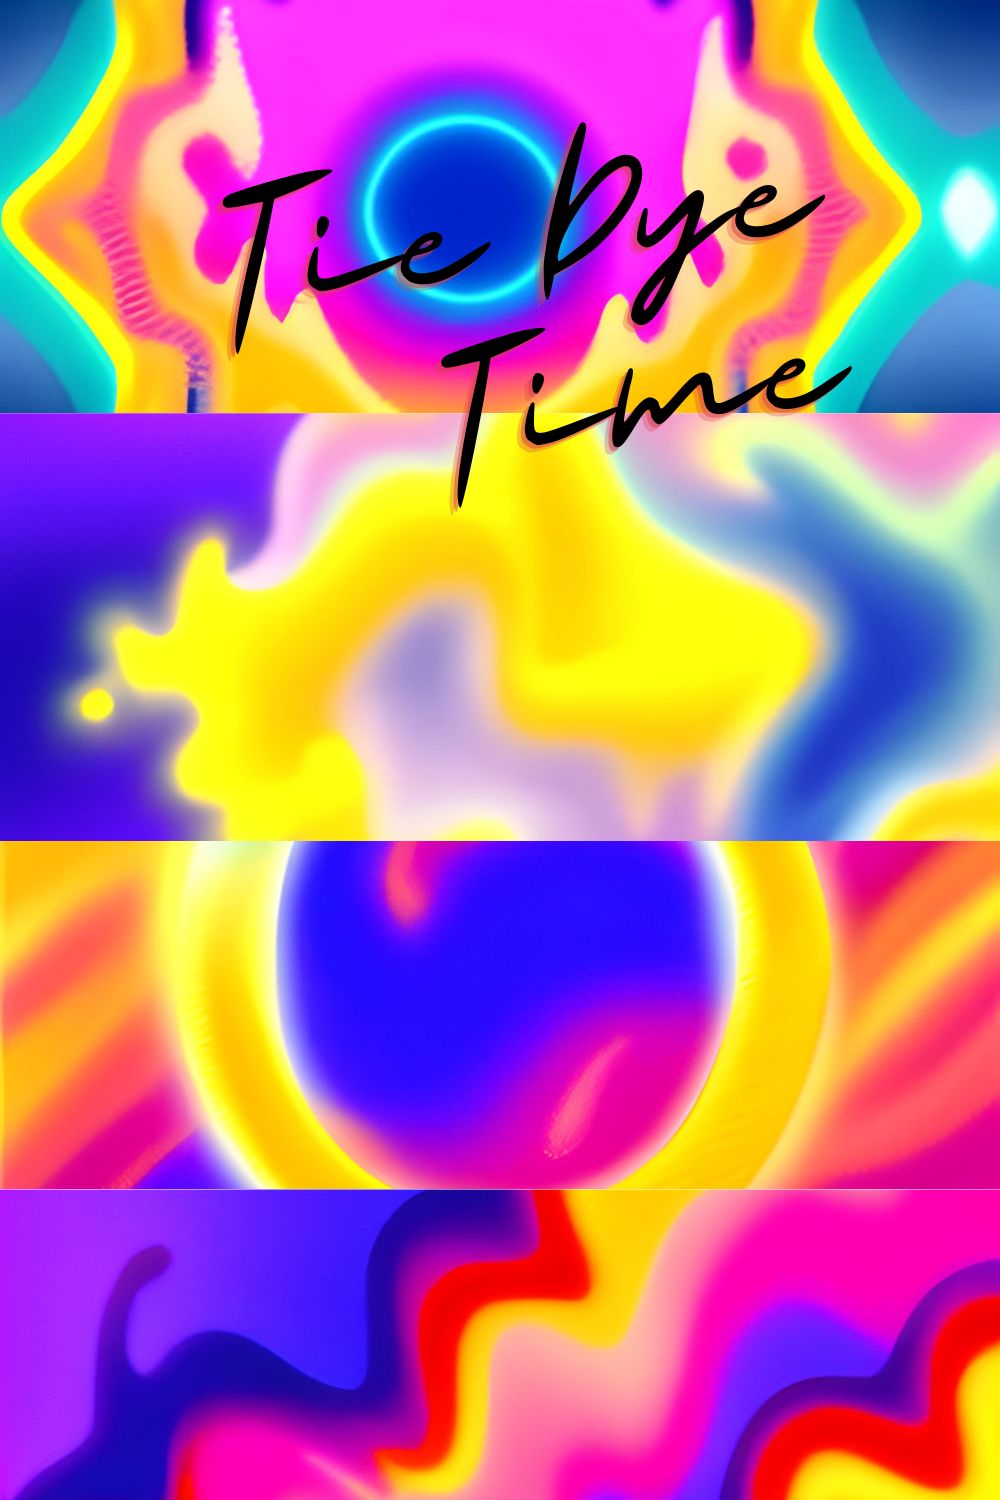 4 tie-dye background images in purple-yellow pinterest preview image.